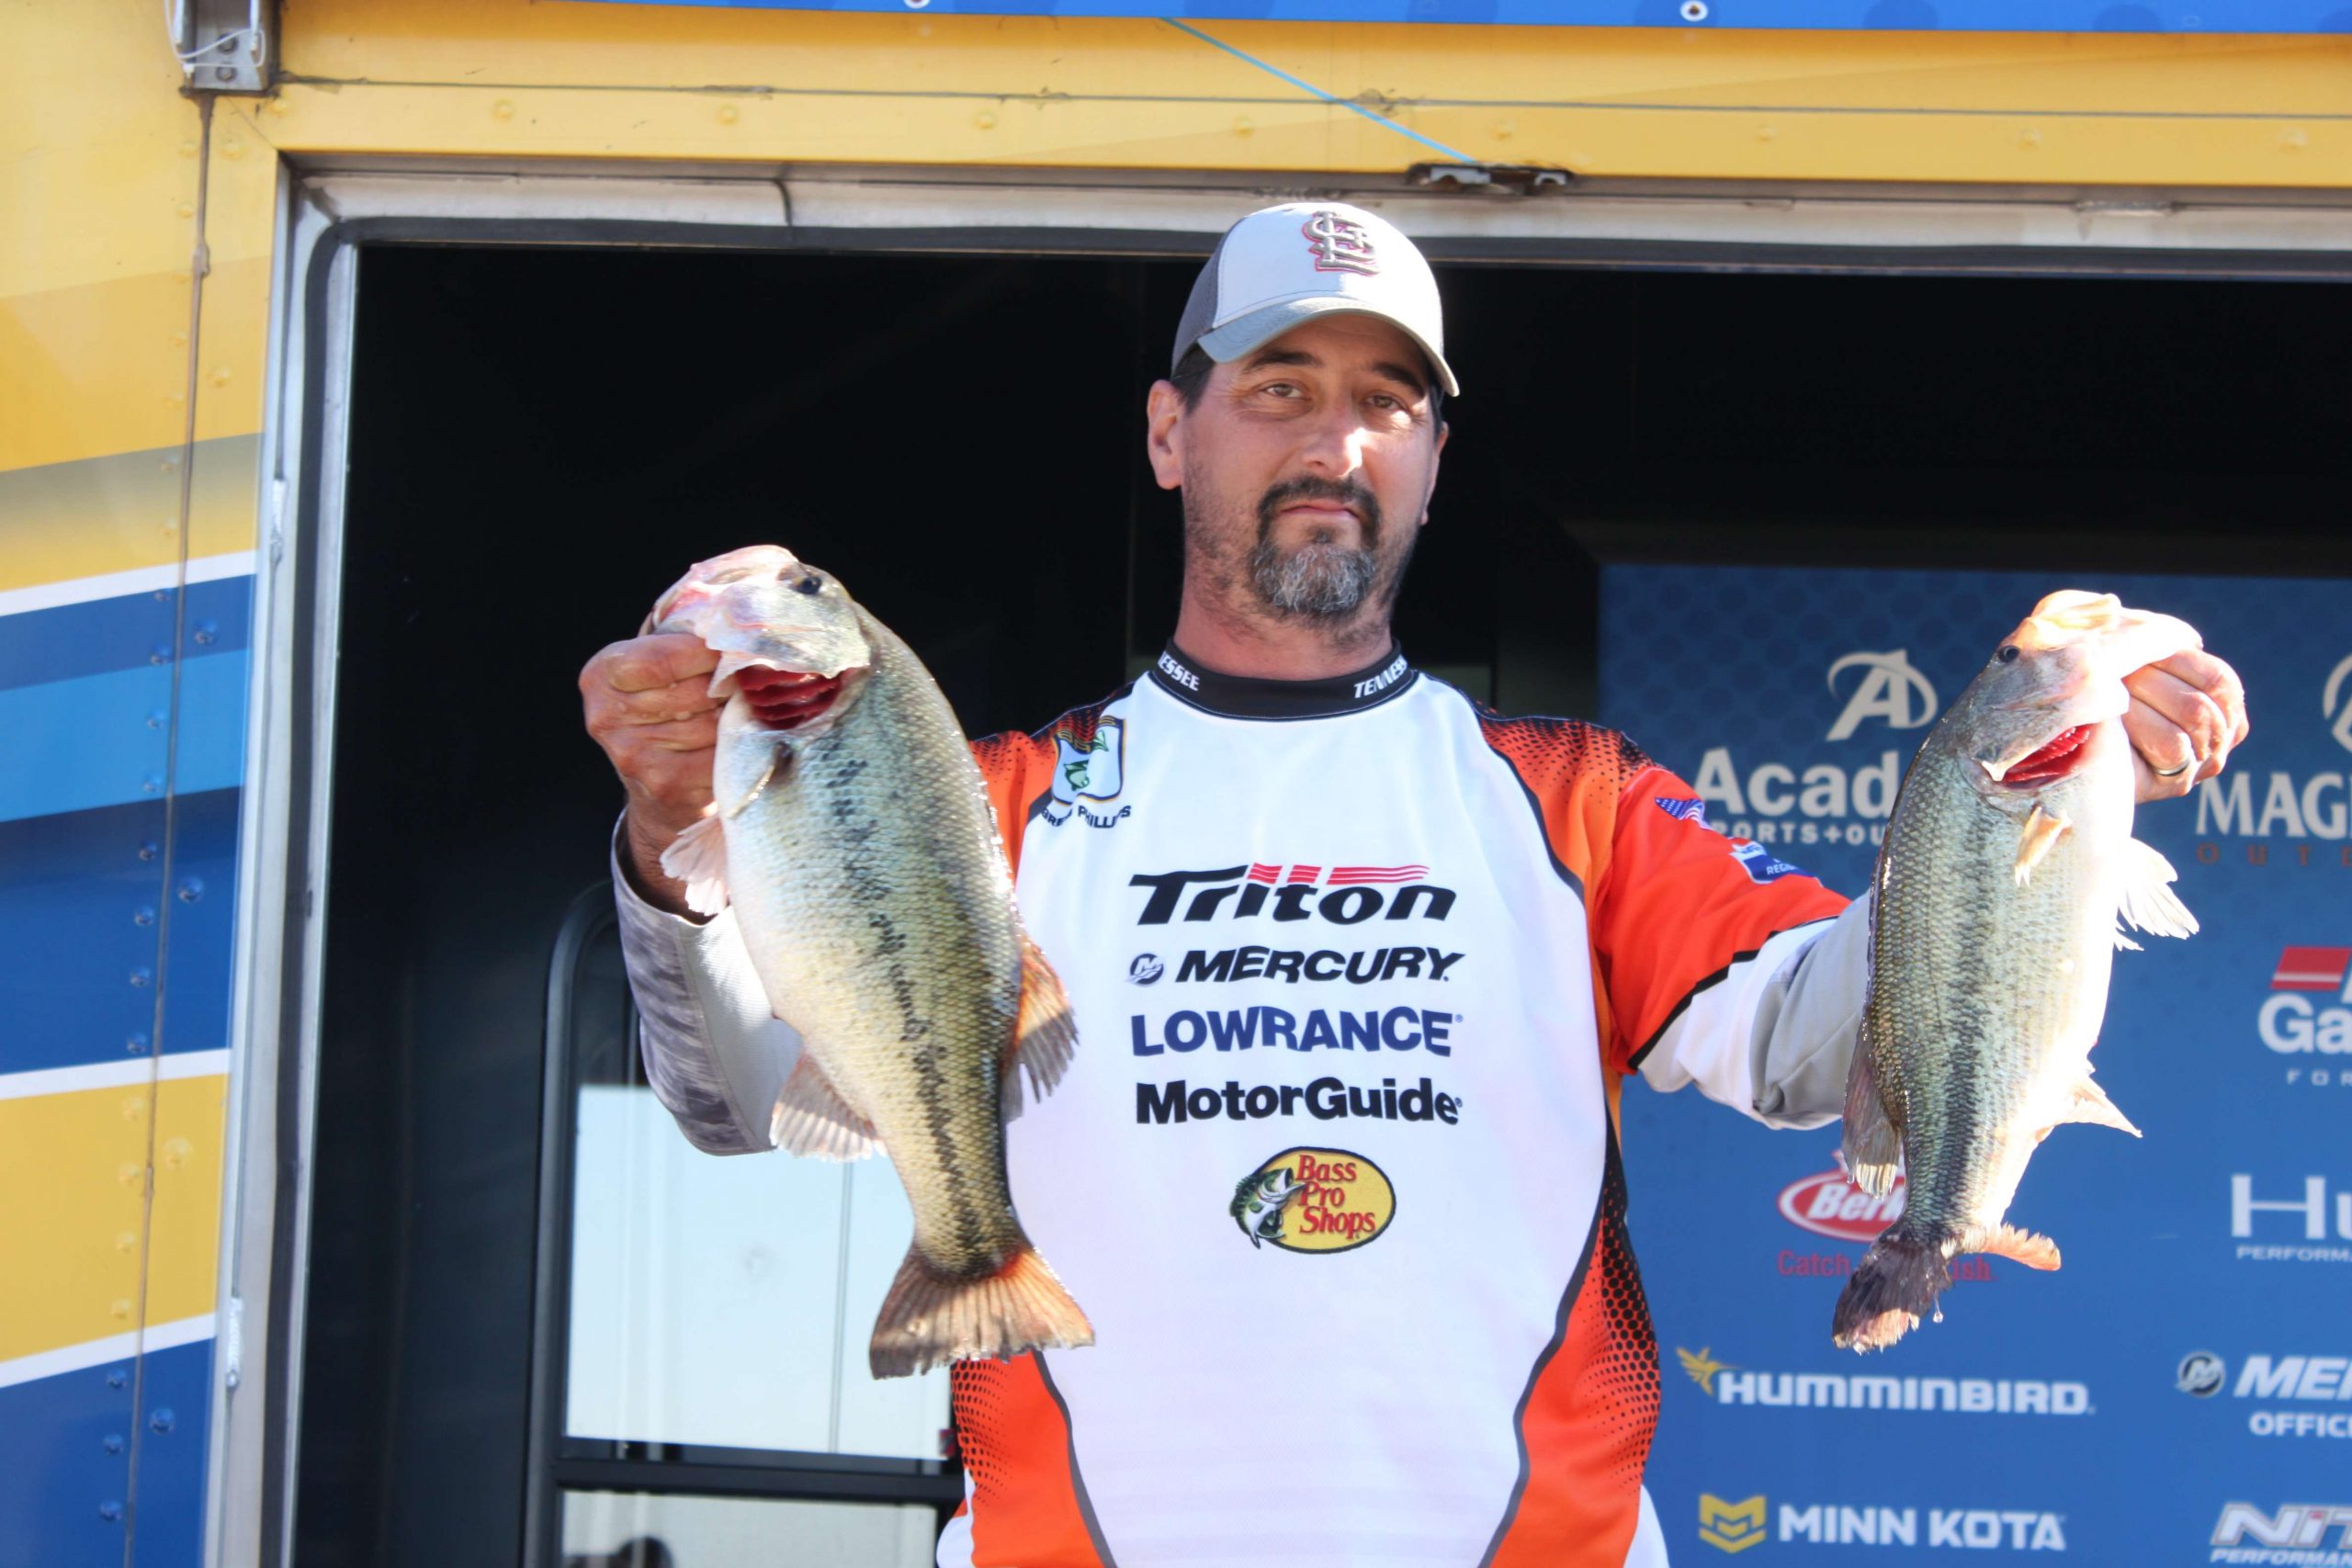 Greg Phillips of Tennessee is in 21st place in the boater division with five bass totaling 15-10.